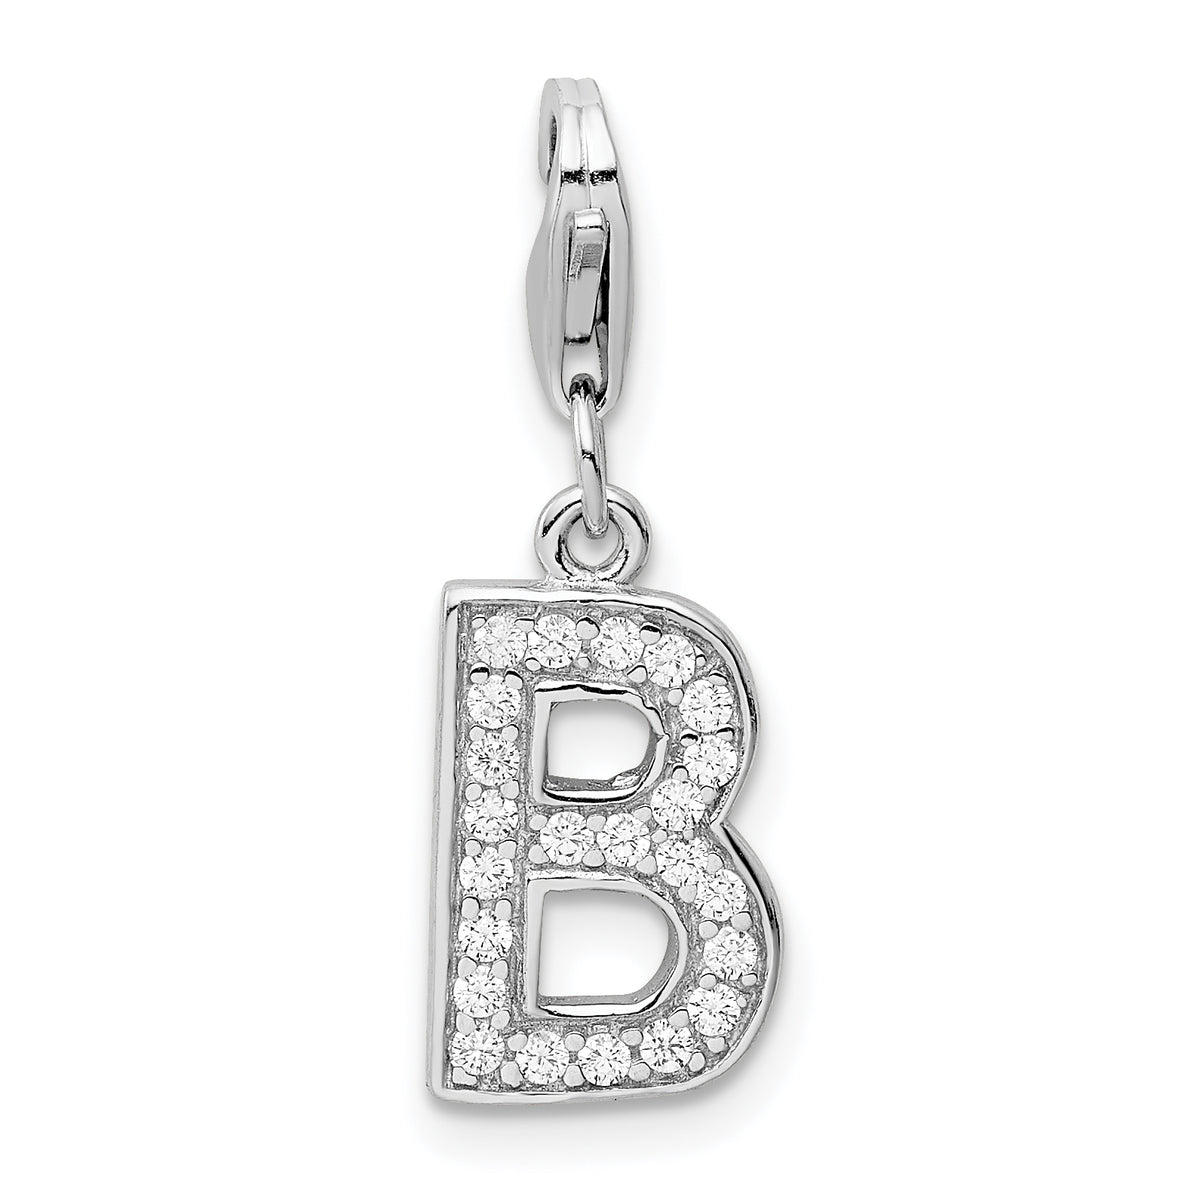 Amore La Vita Sterling Silver Rhodium-plated Polished CZ Letter B Initial Charm with Fancy Lobster Clasp